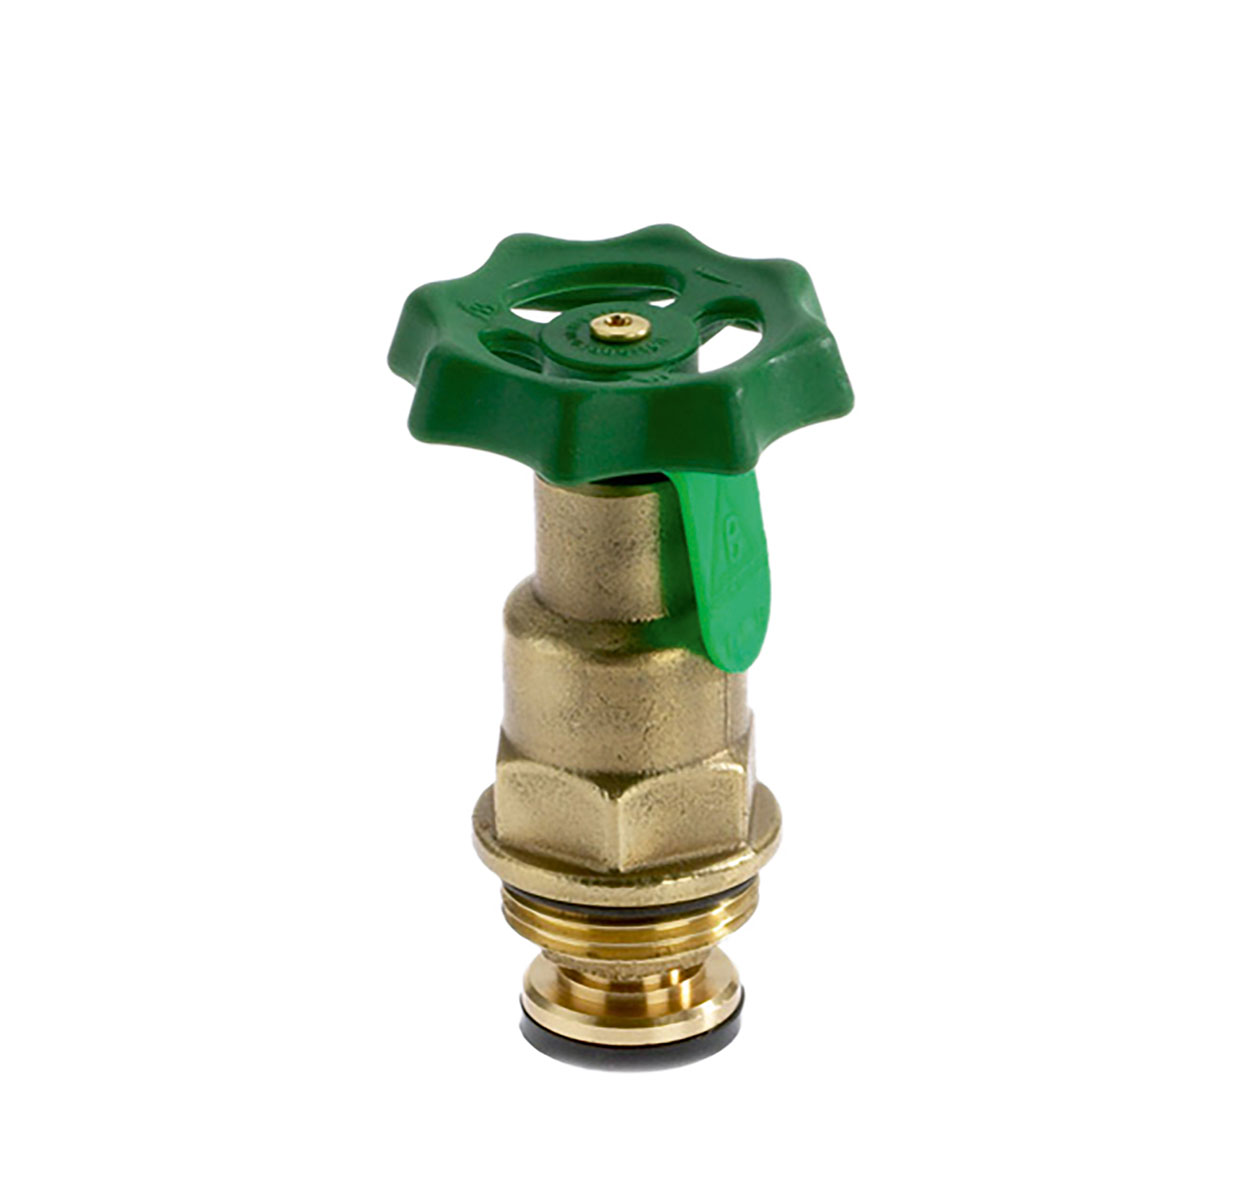 1215200 - Brass Upper-part with grease chamber for Combined Free-flow and Backflow-preventer valves, not-rising spindle